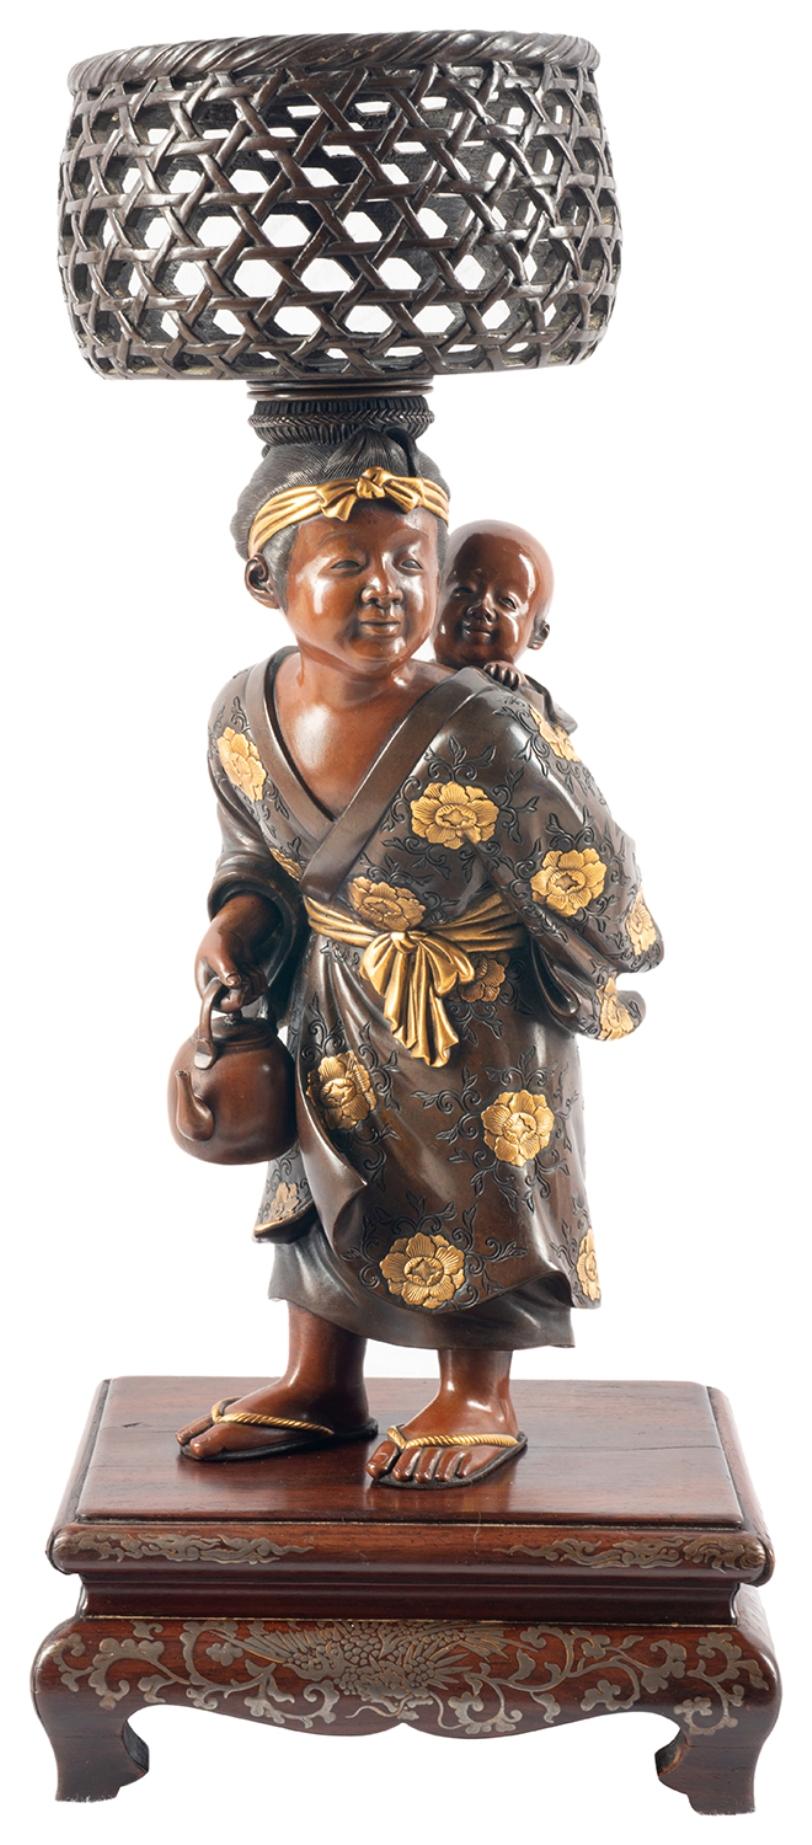 A fine quality pair of Japanese Meiji period (1868-1912) Miyao bronze figures depicting a mother carrying her child with a wicker basket on her head, carrying a kettle, the other of a man trying to open an umbrella. Both having wonderful patination